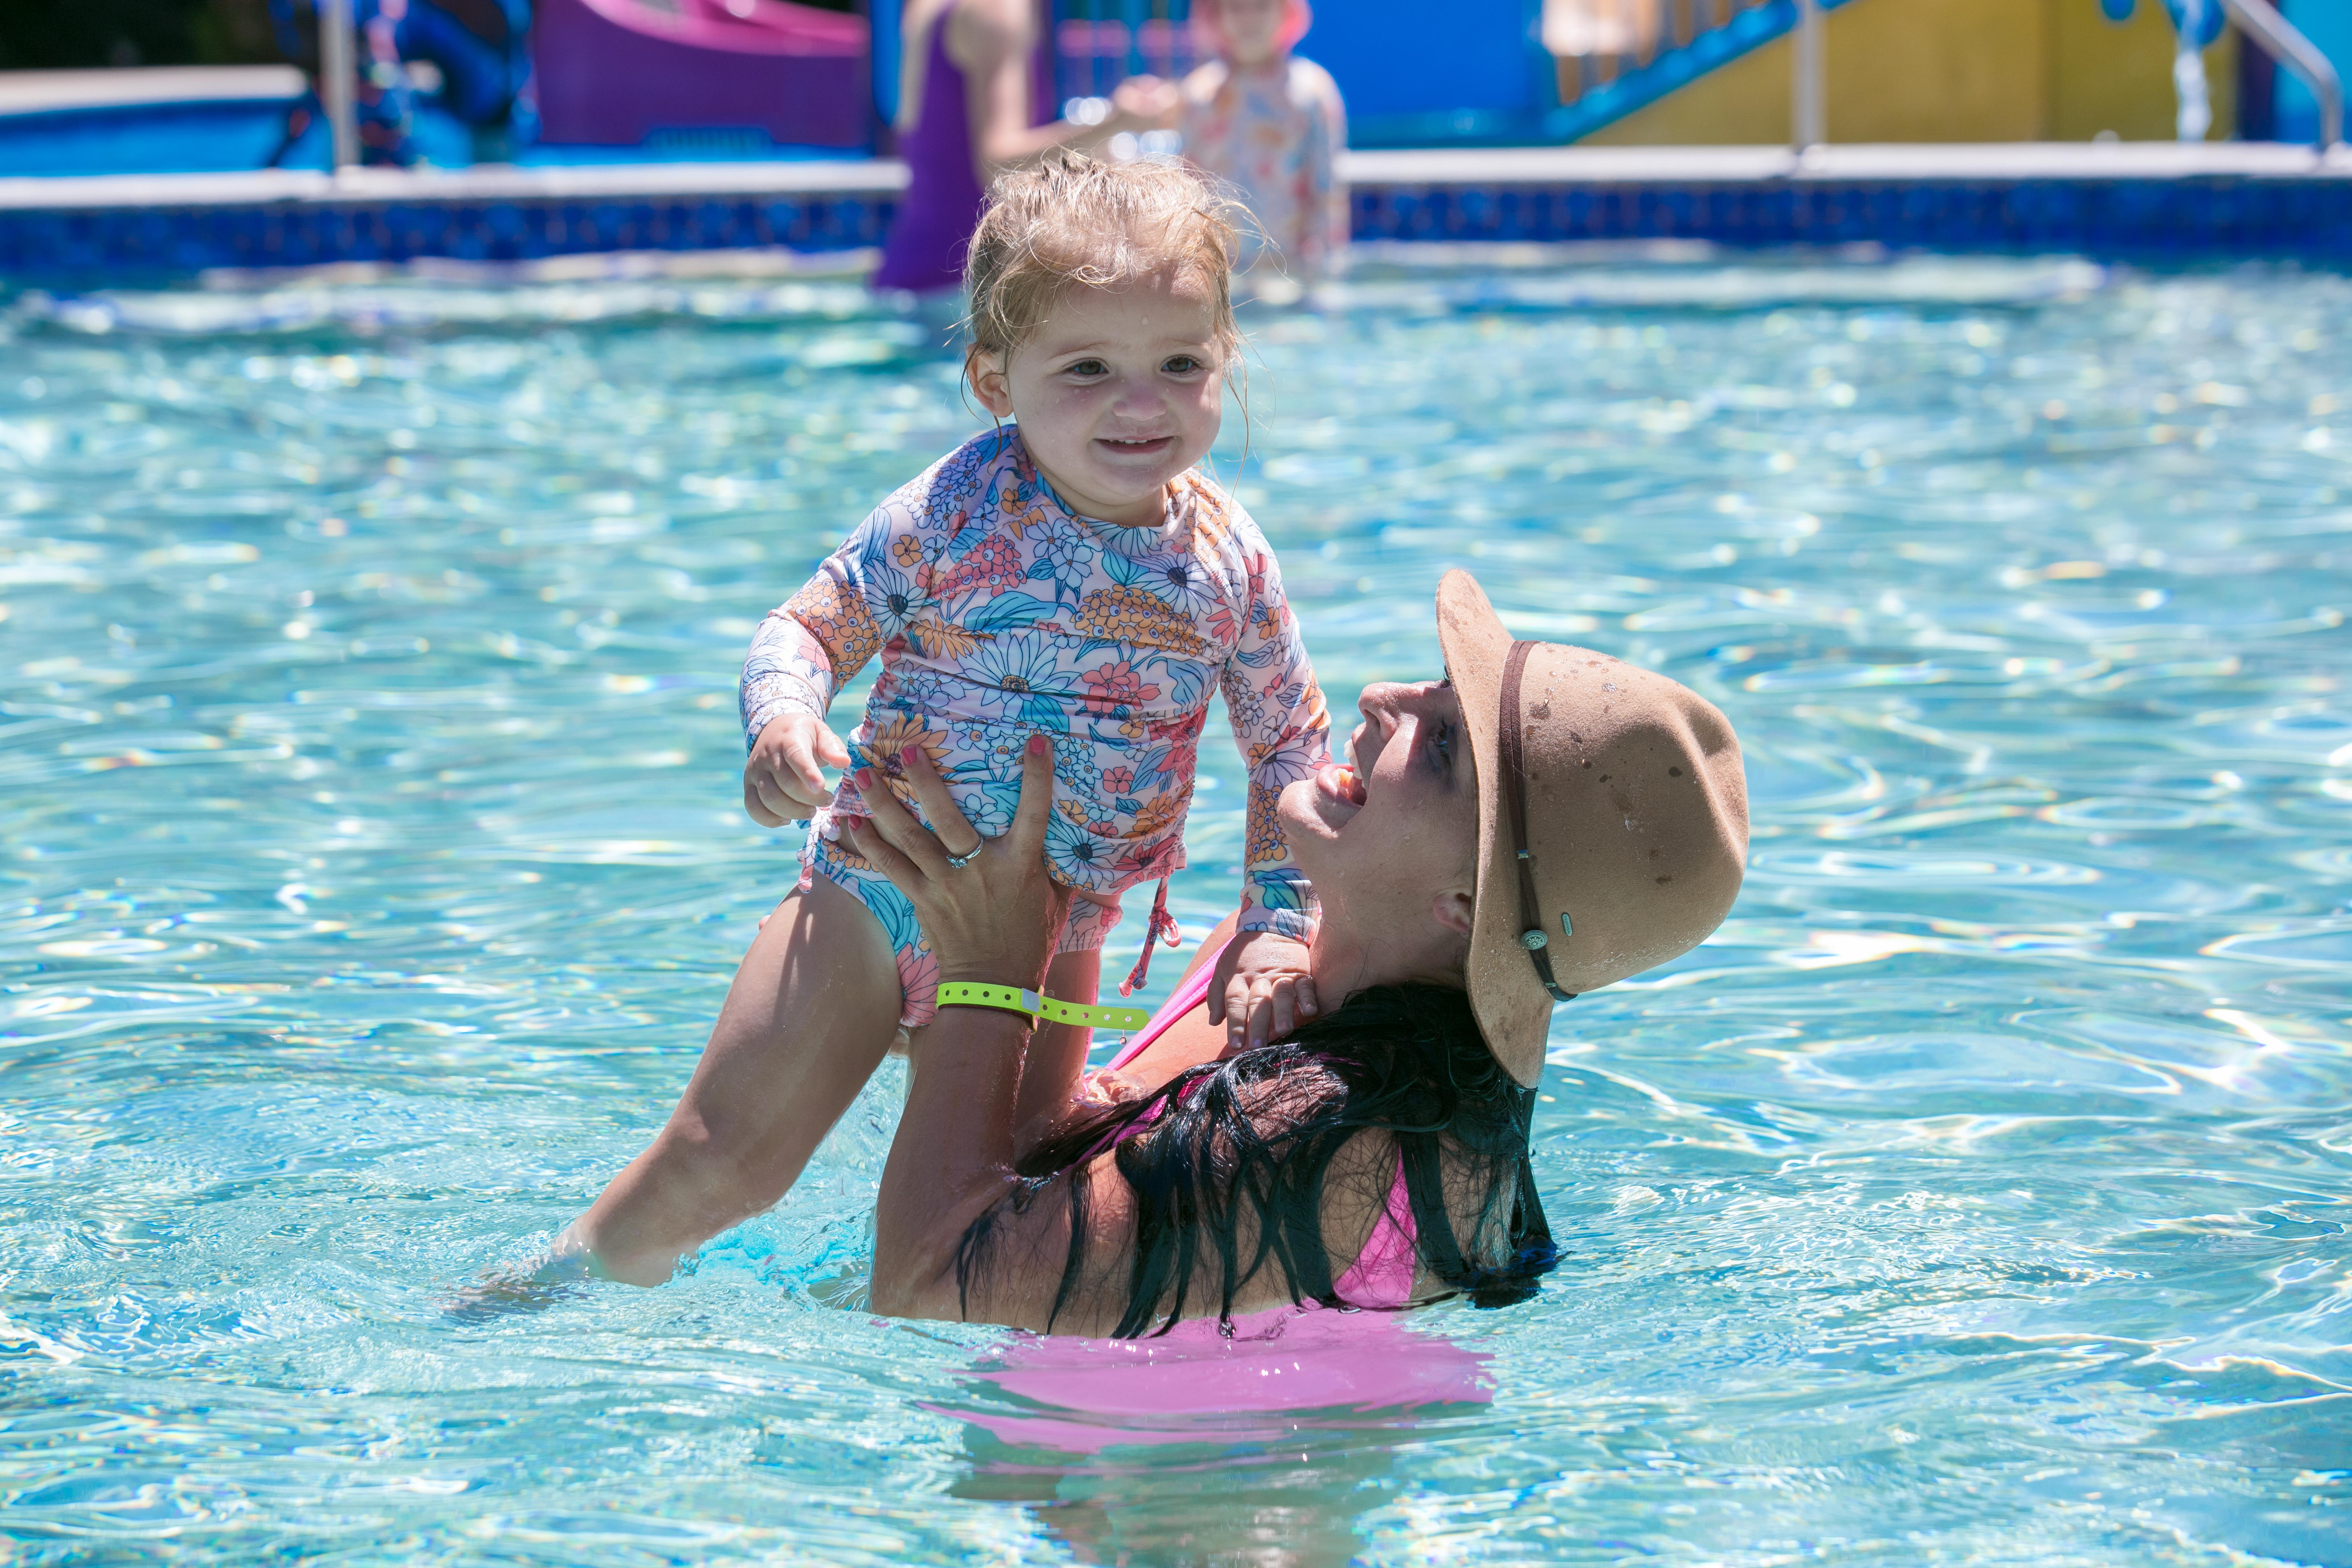 Summer swim safety tips for families